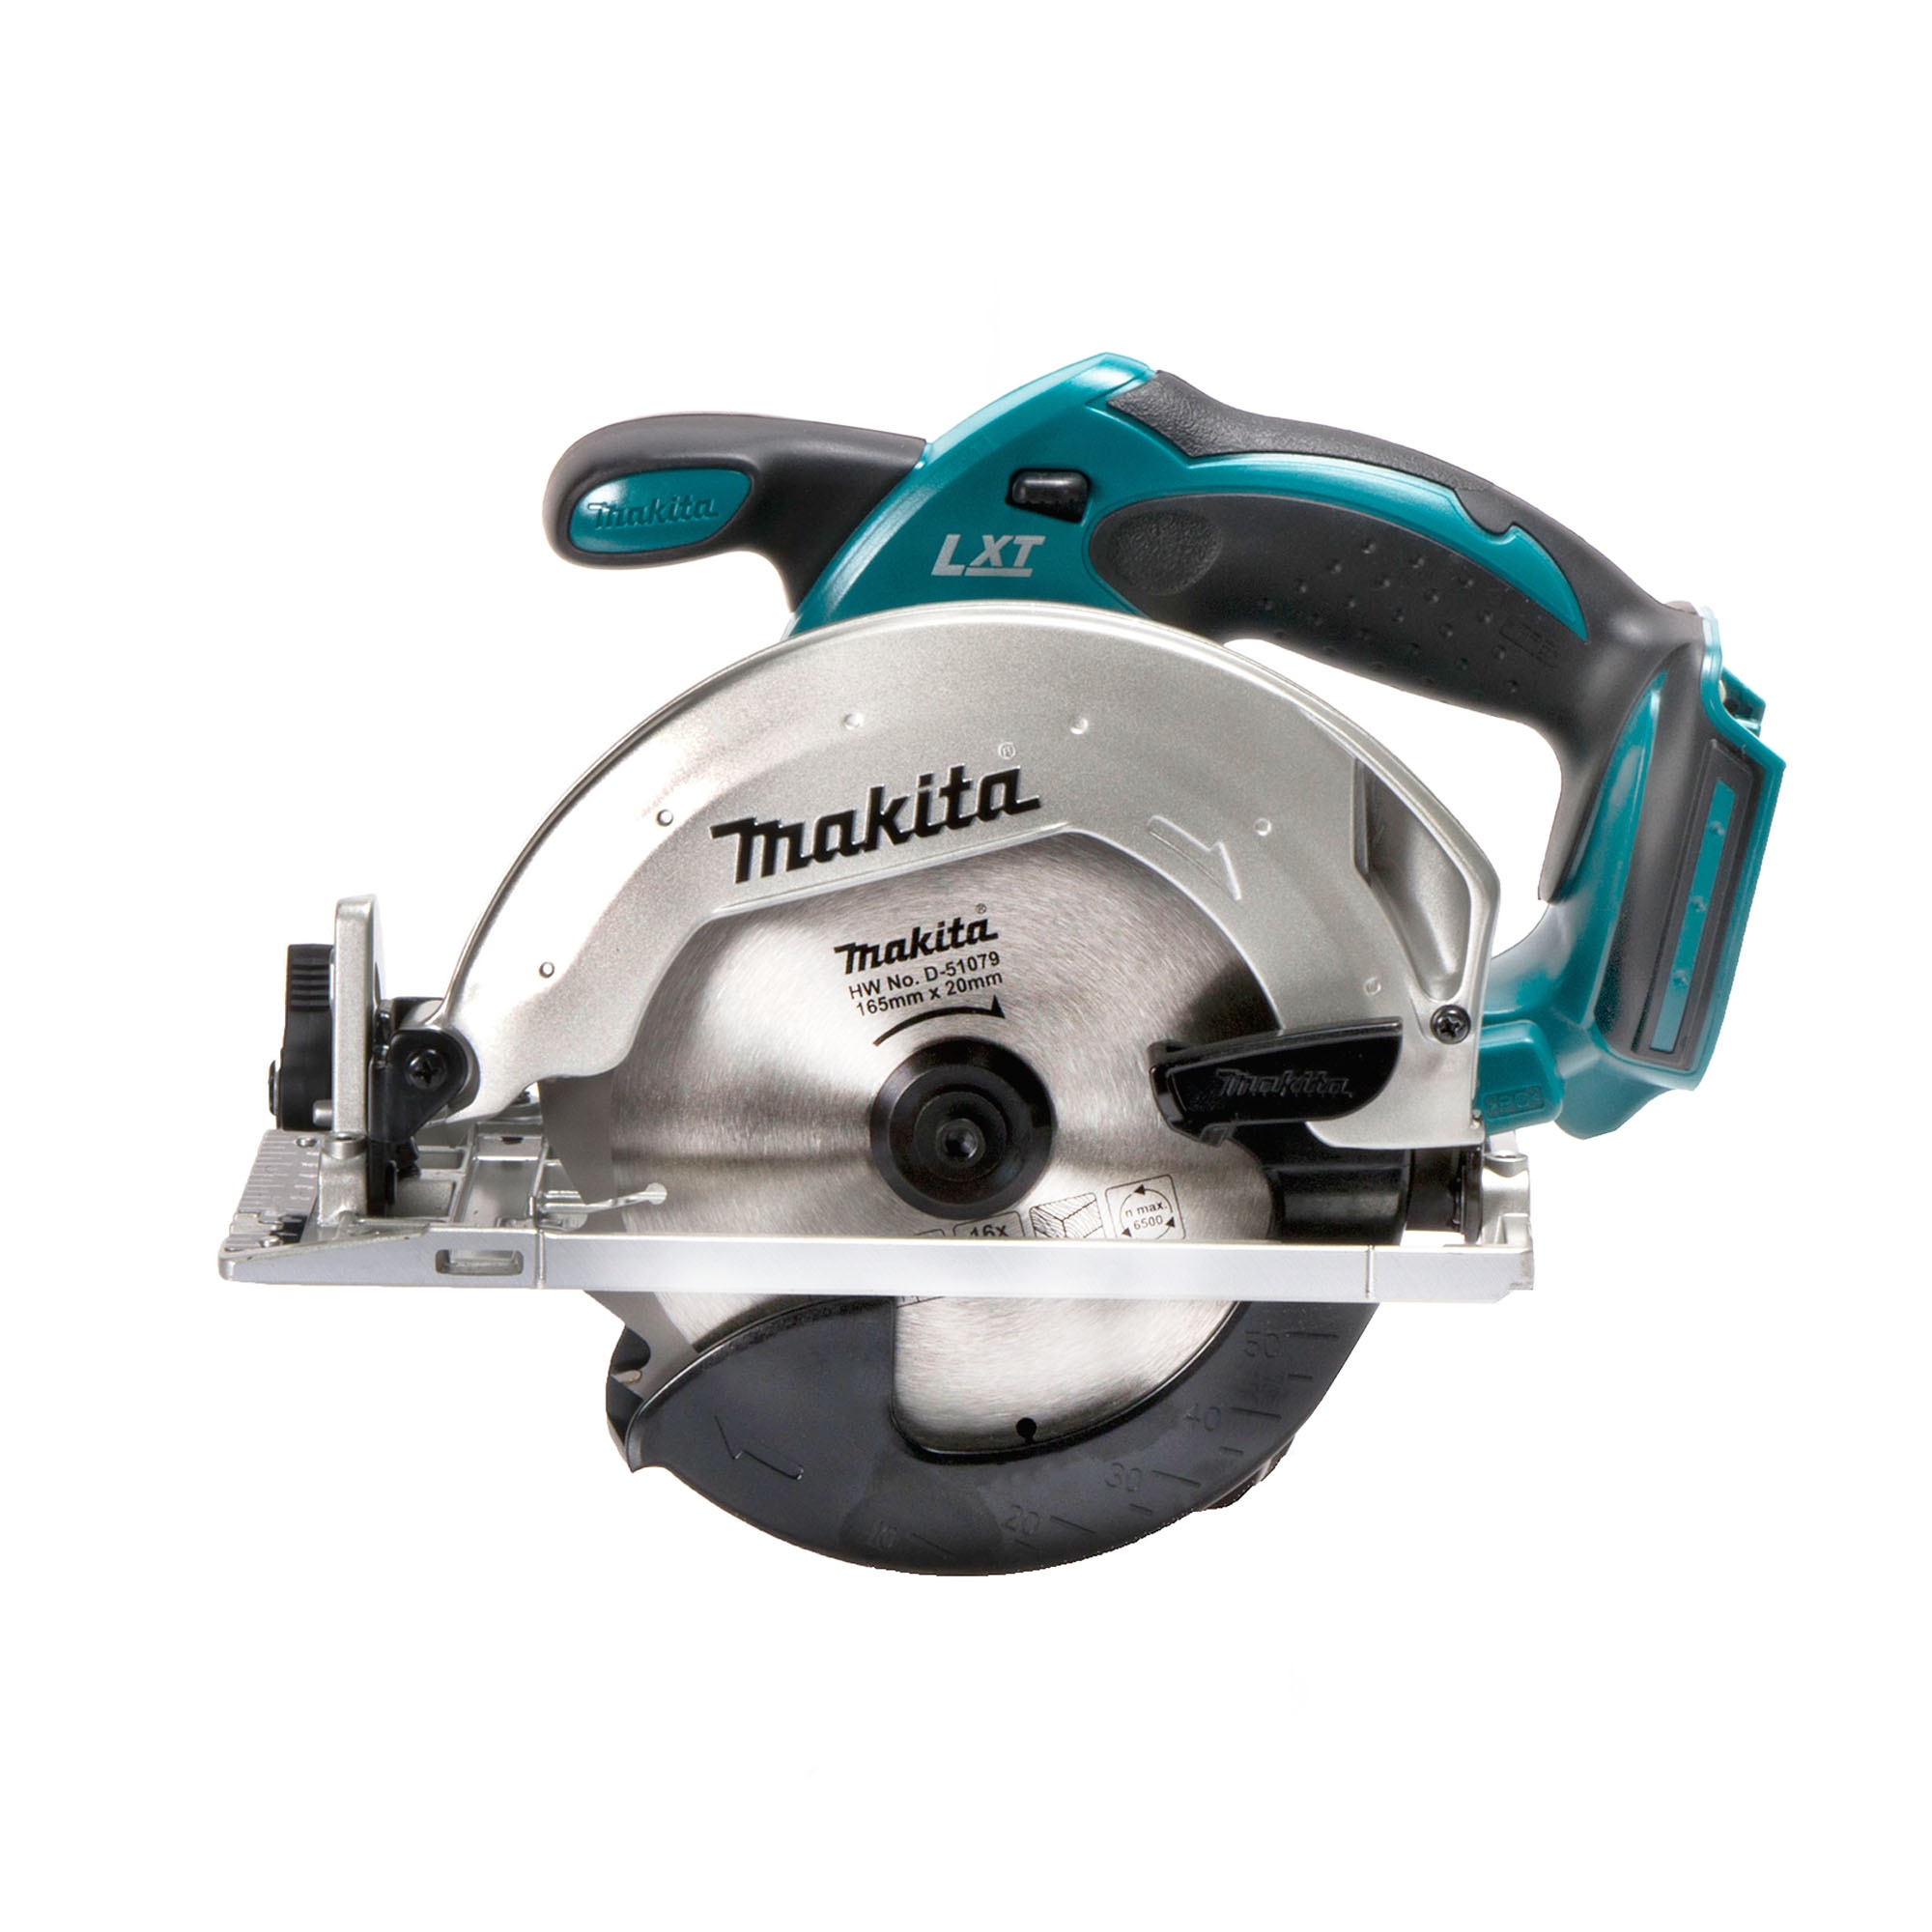 Makita DSS611Z 18V li-ion LXT Circular Saw With 1 x 5Ah Battery Charger & Case 